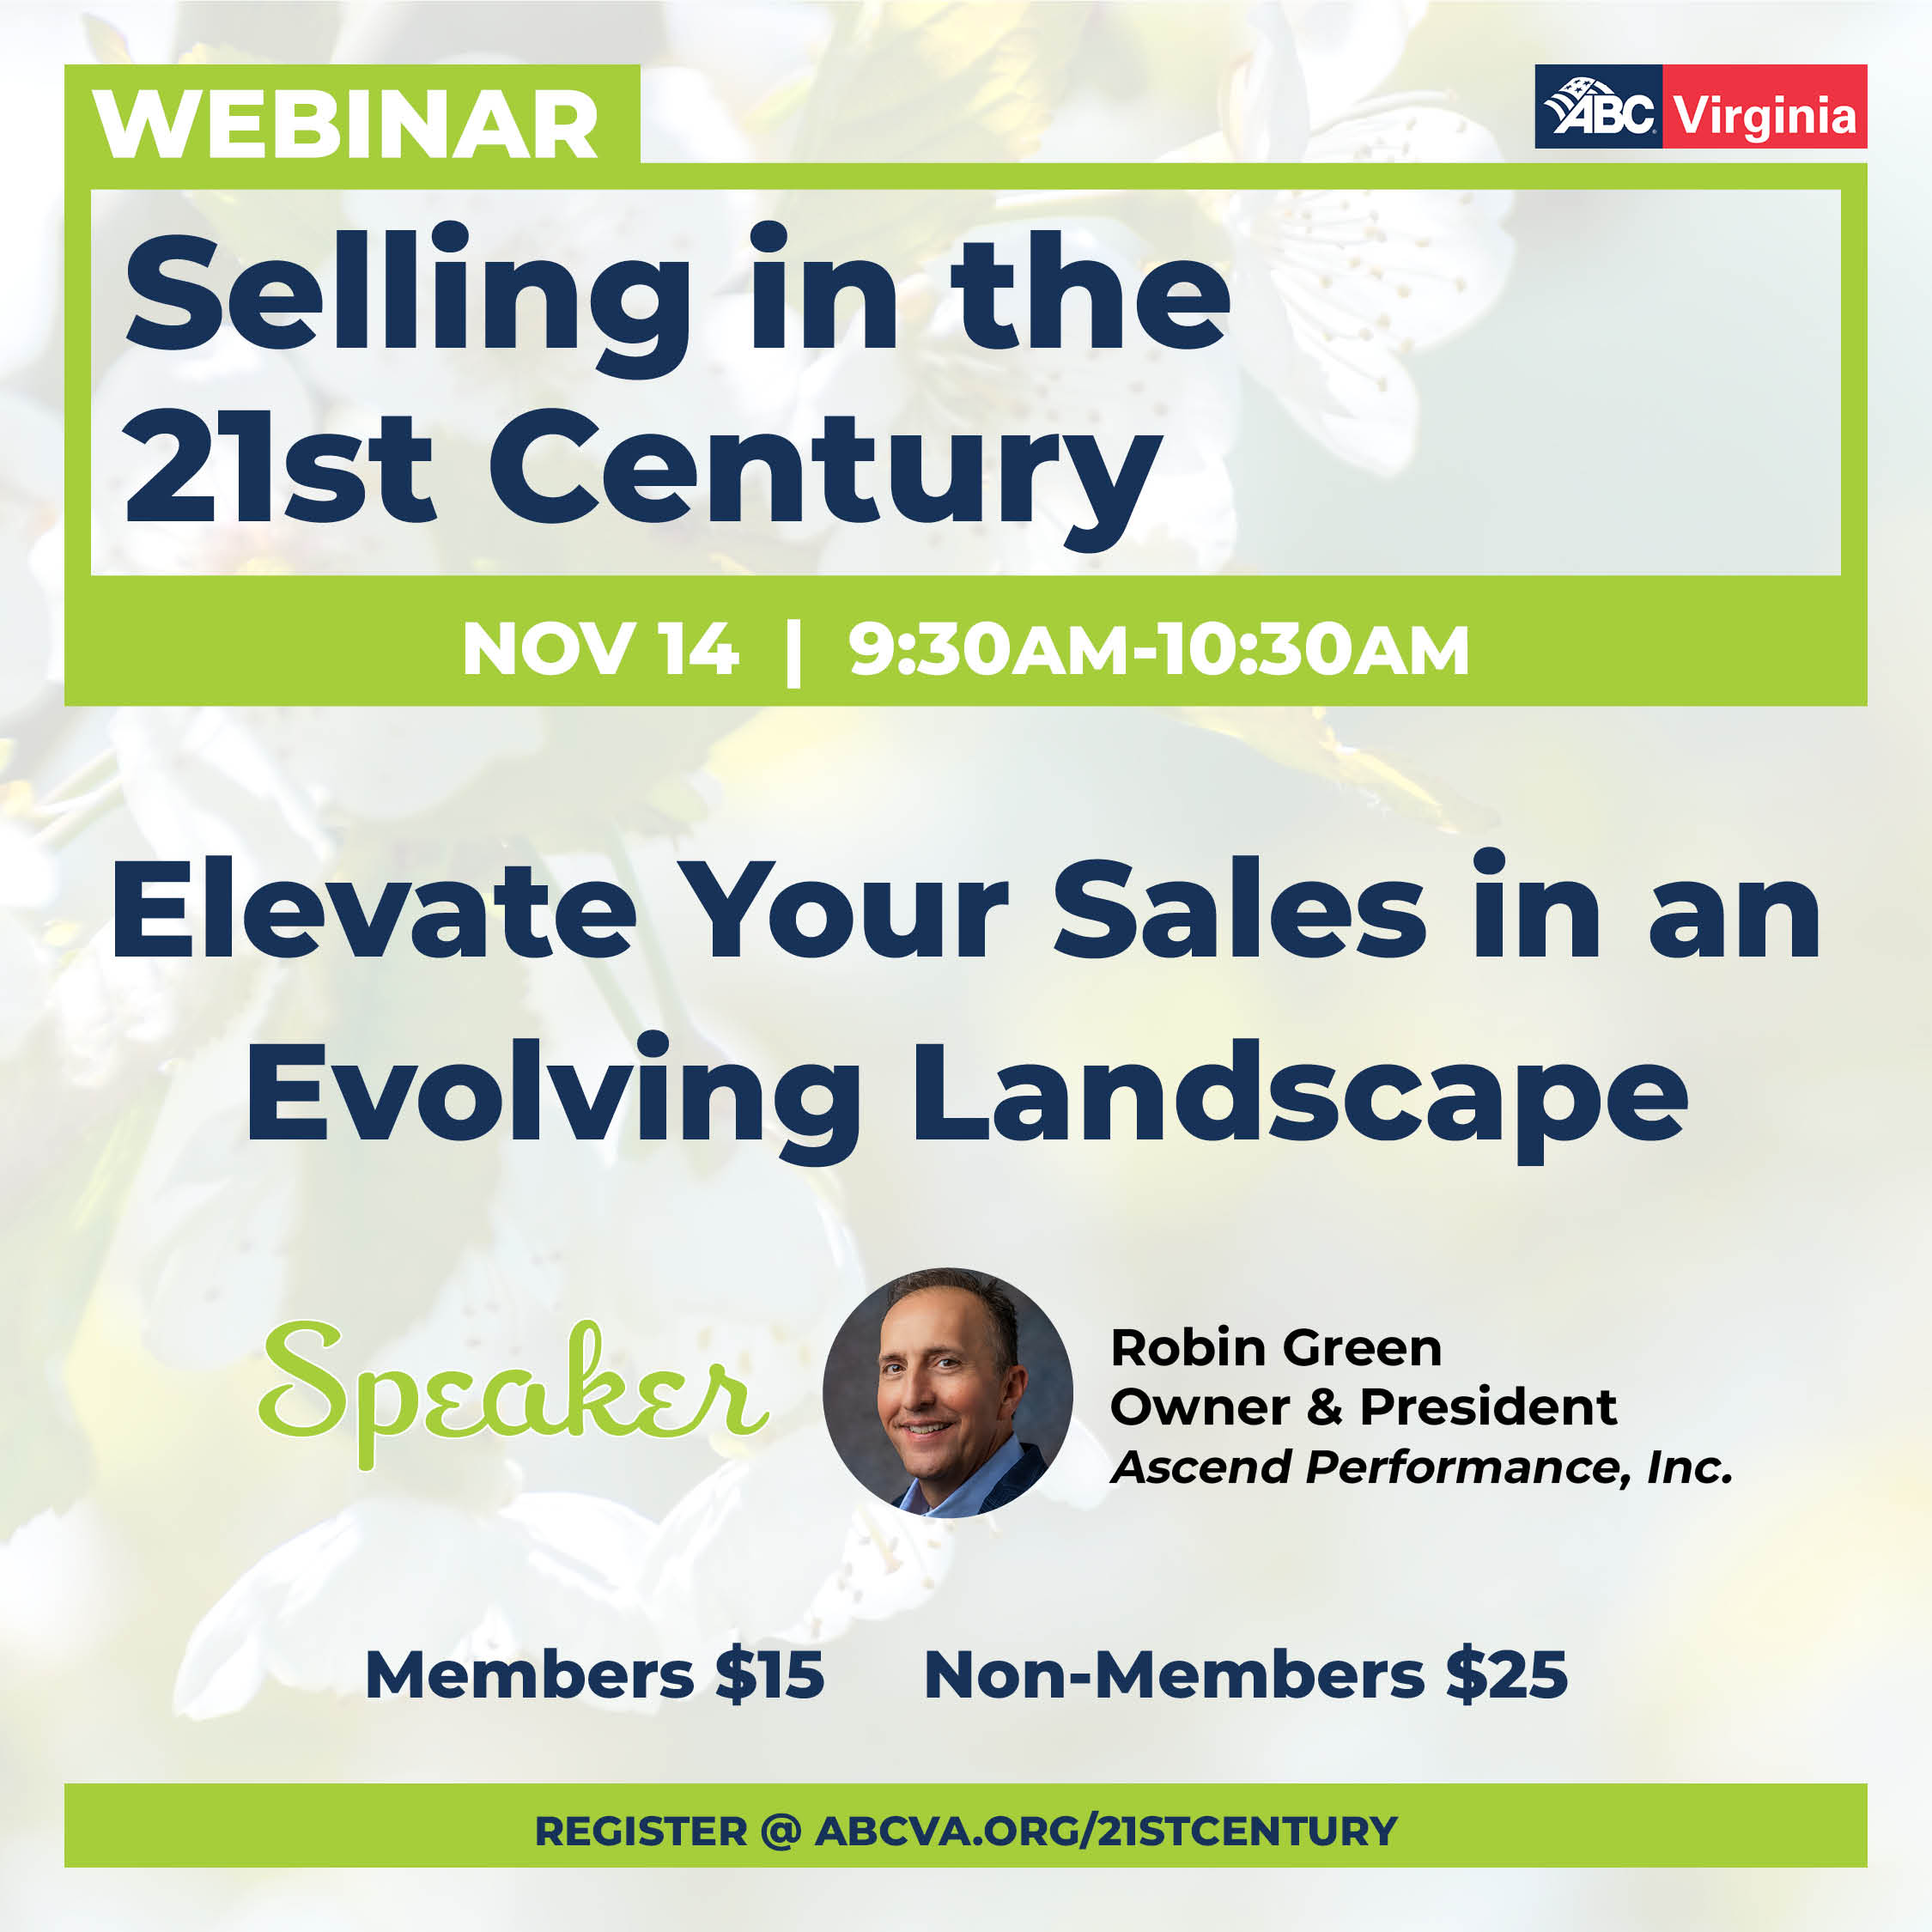 HR Selling In The 21st Century NOV 14 WEB